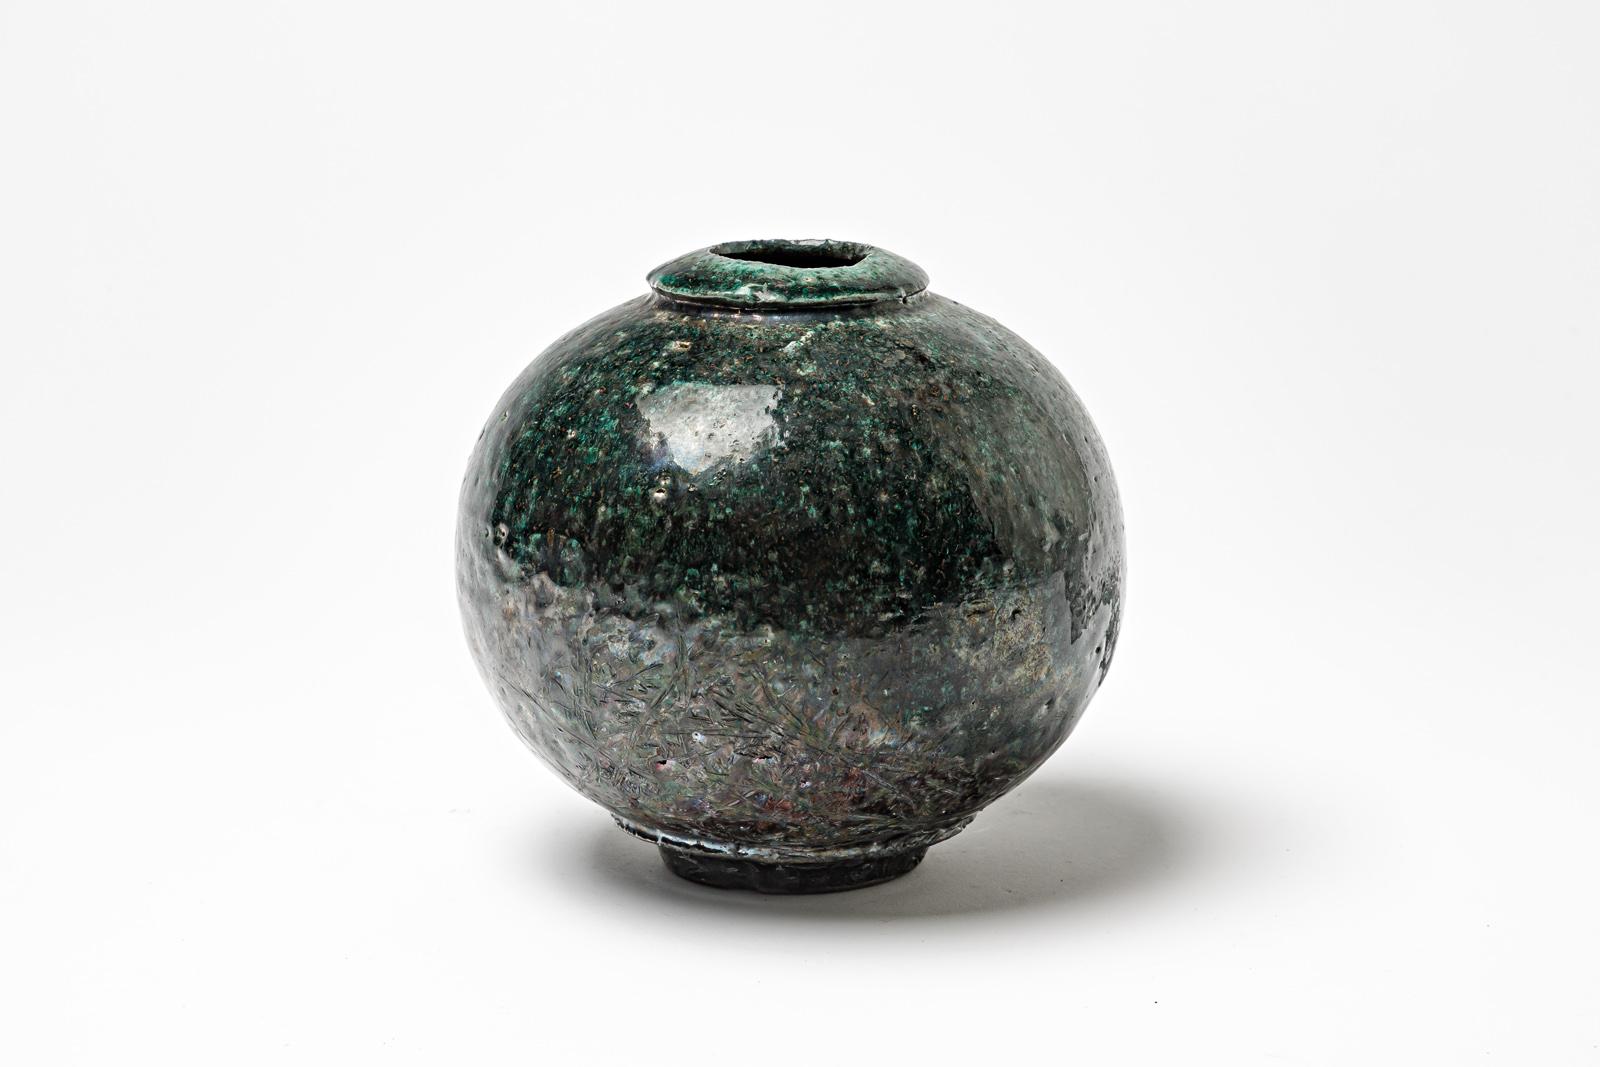  Green and black glazed ceramic vase by Gisèle Buthod Garçon, circa 1980-1990 In Excellent Condition For Sale In Saint-Ouen, FR